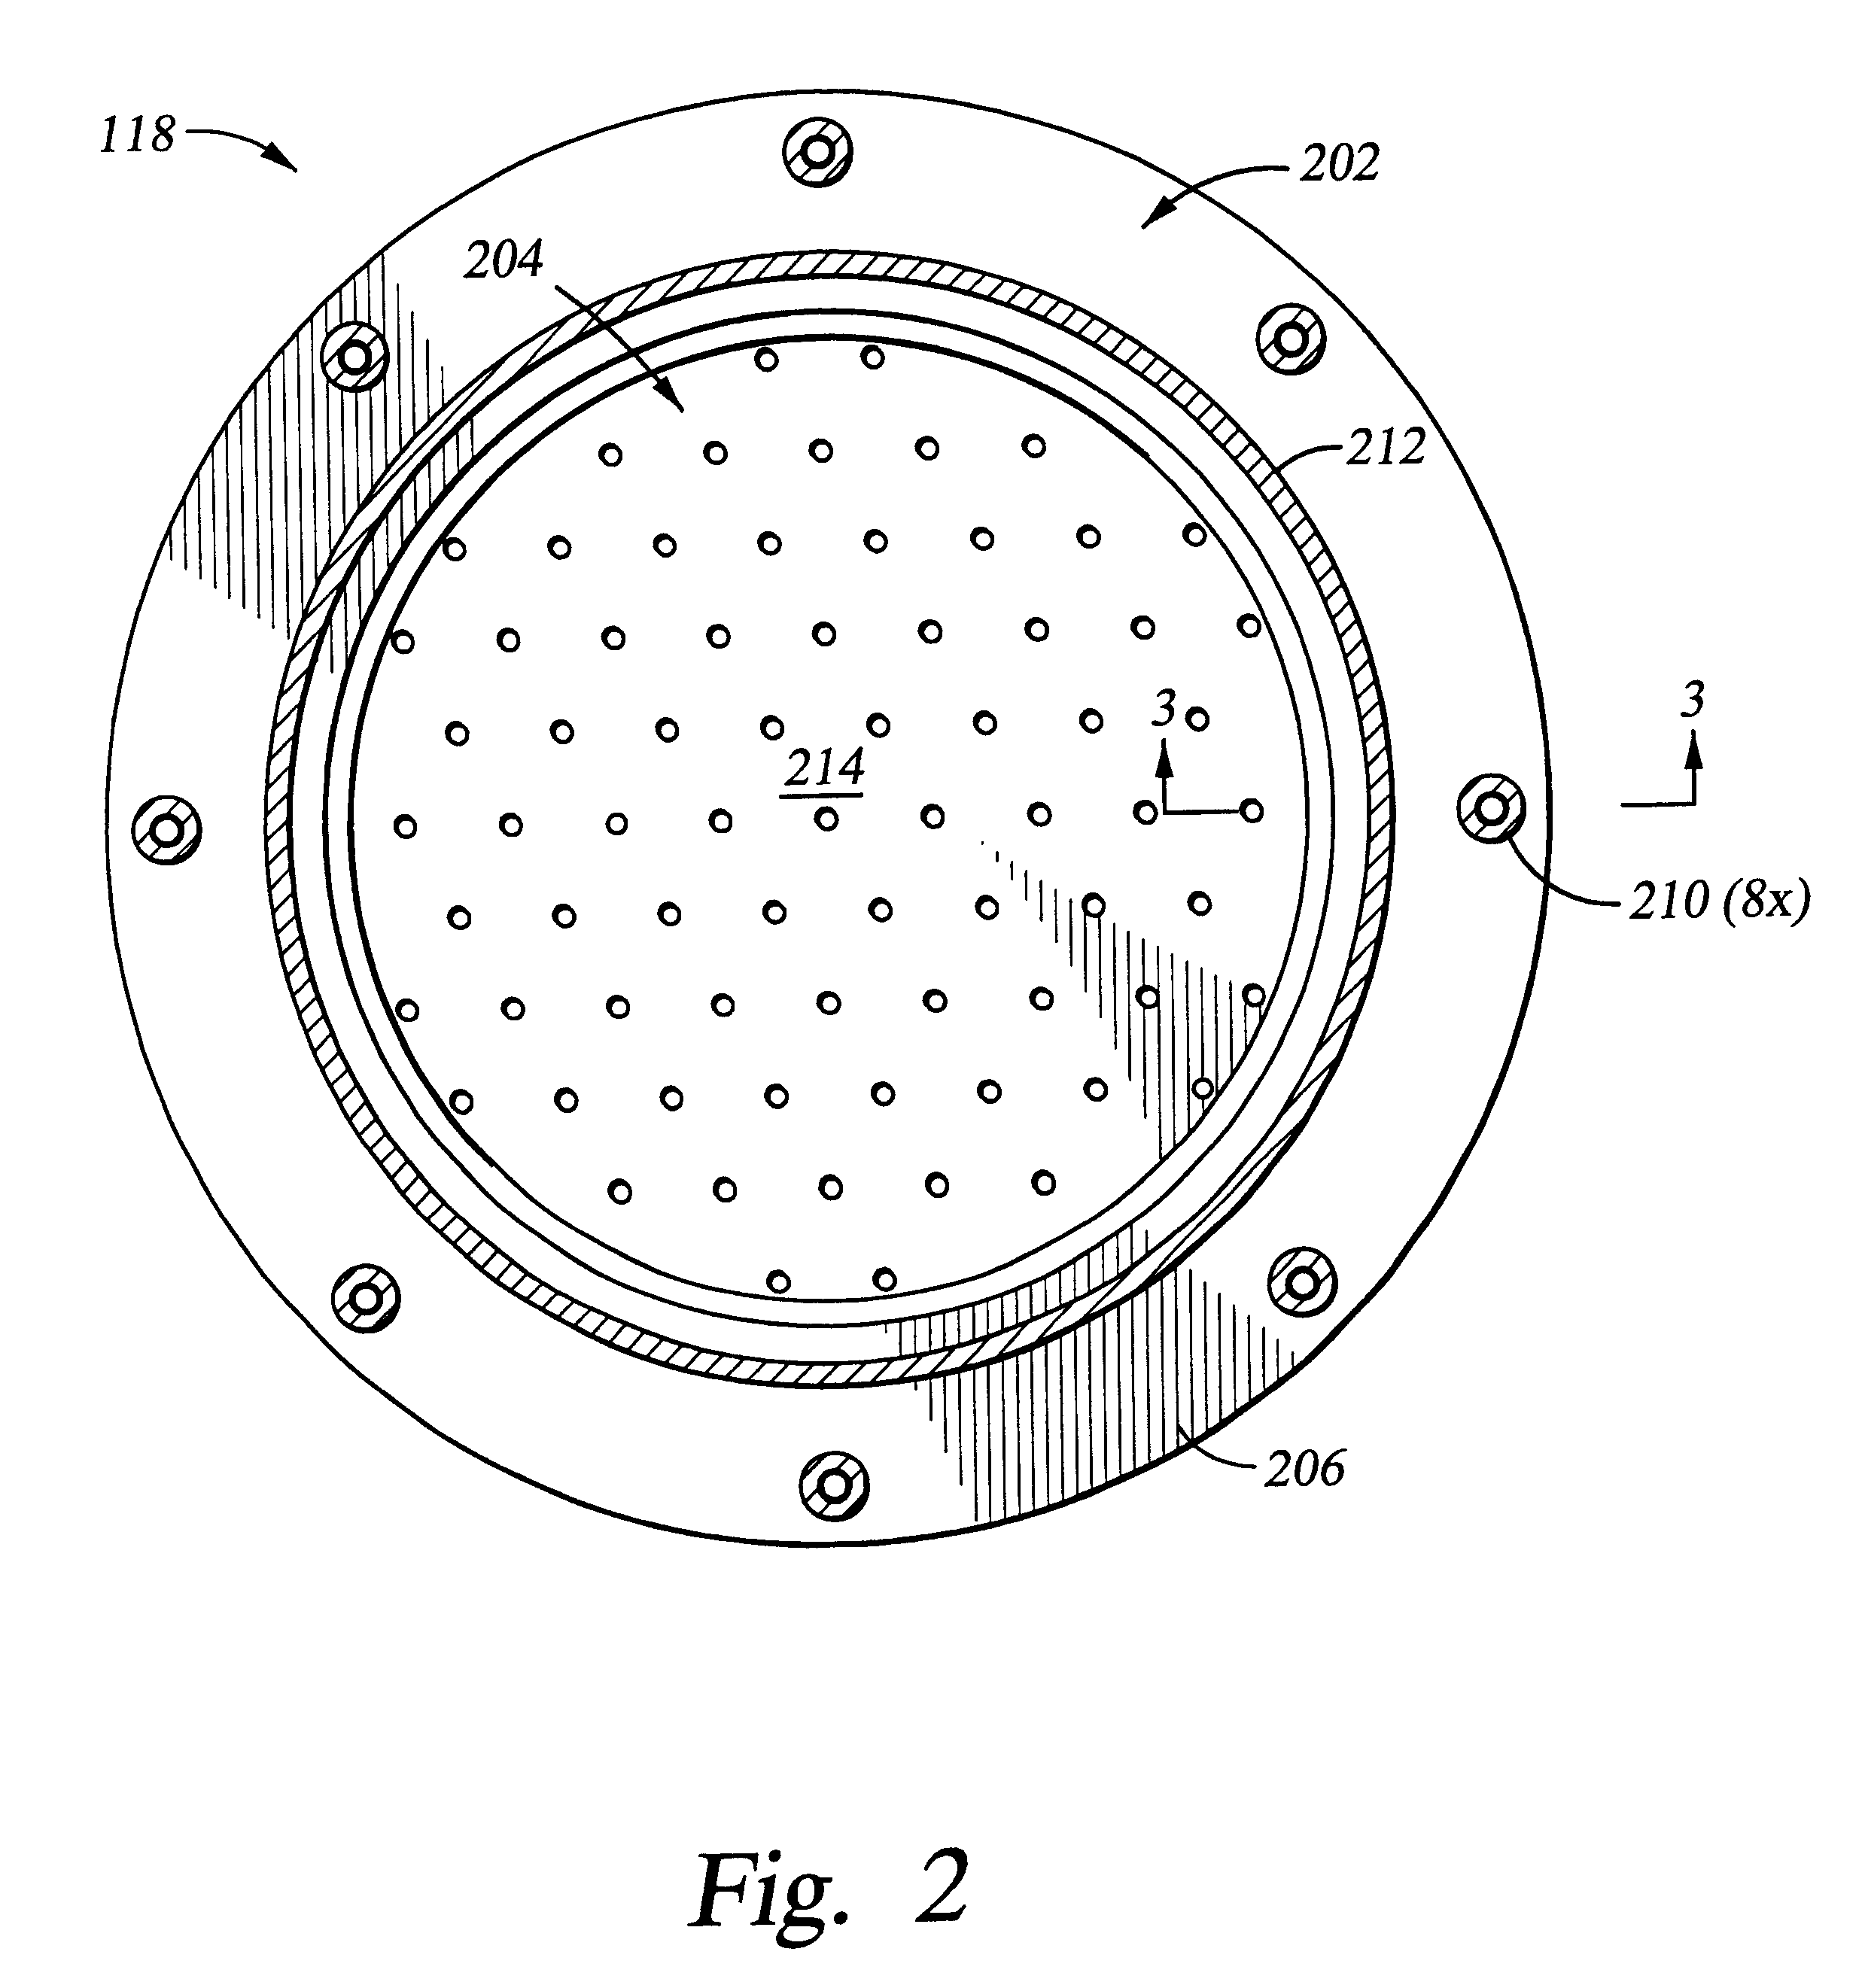 Showerhead with reduced contact area